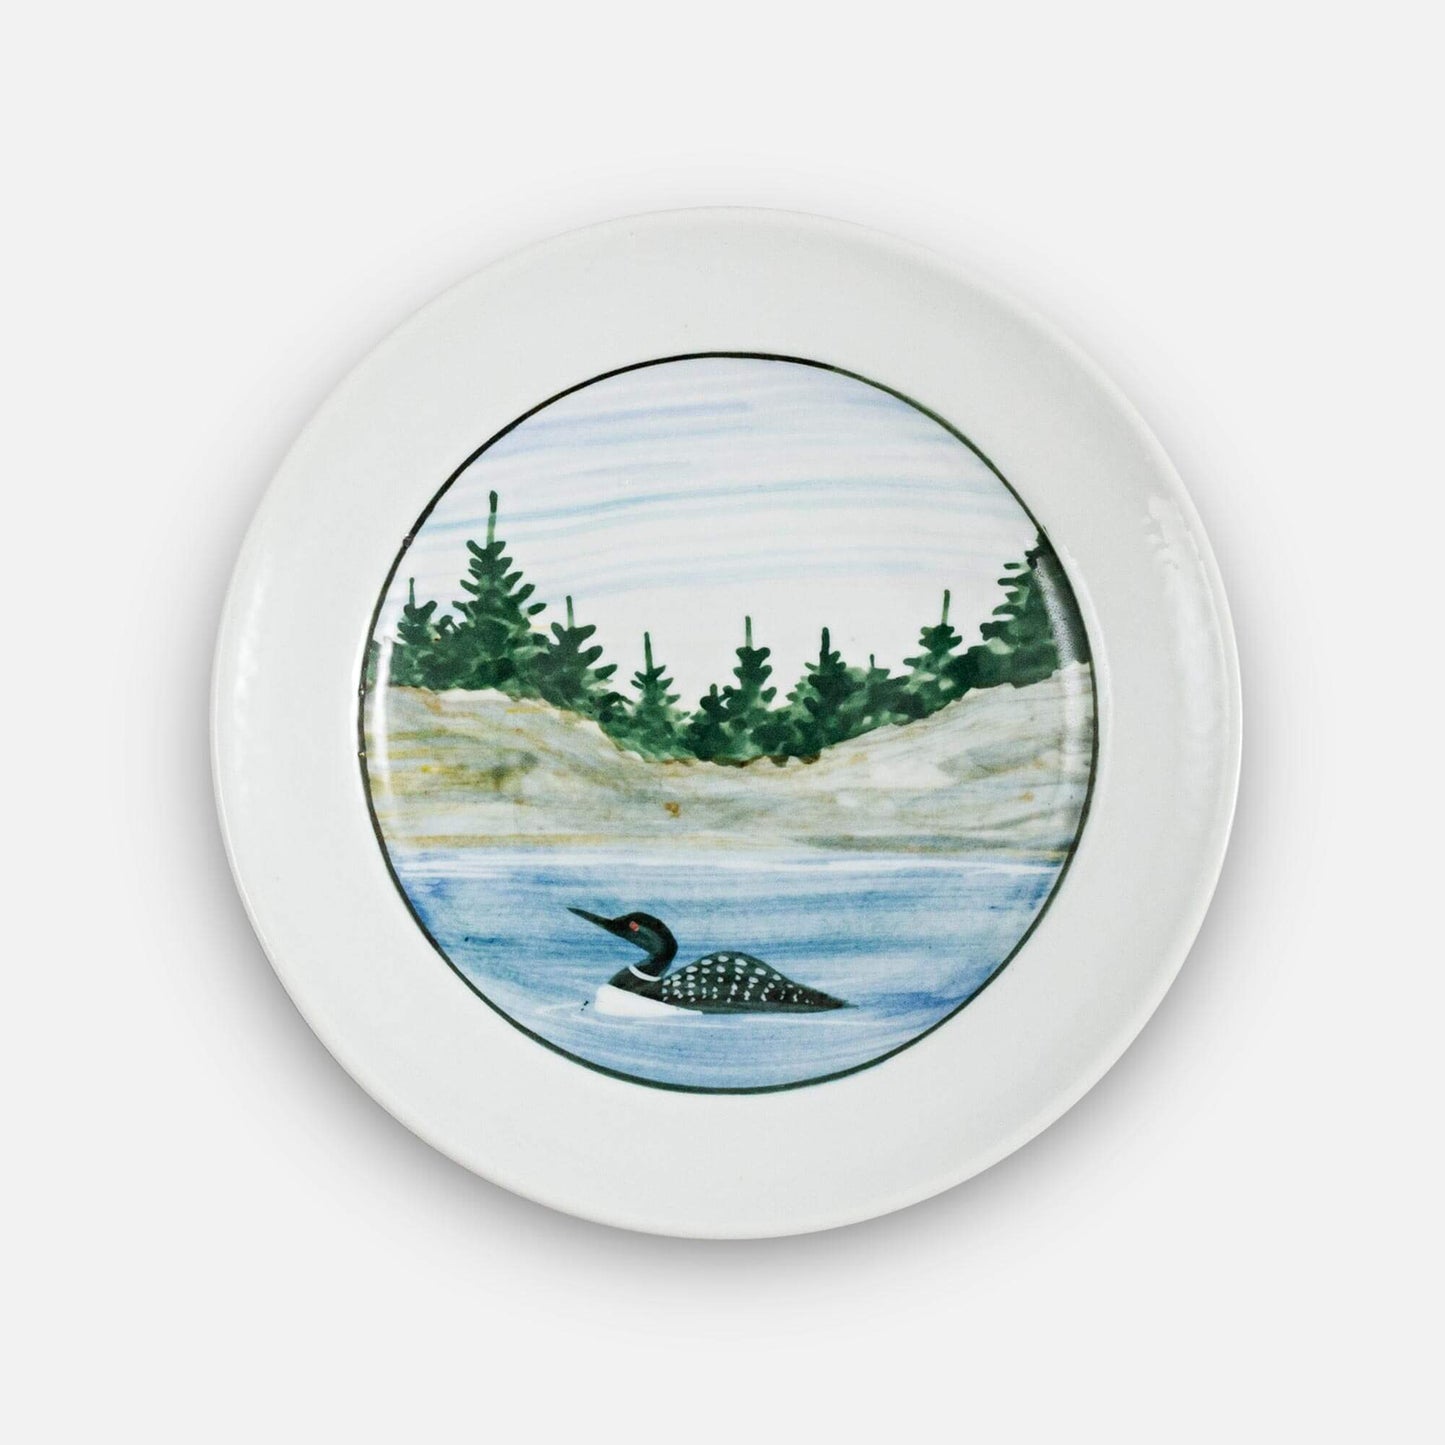 Handmade Pottery Footed Dinner Plate in Loon pattern made by Georgetown Pottery in Maine